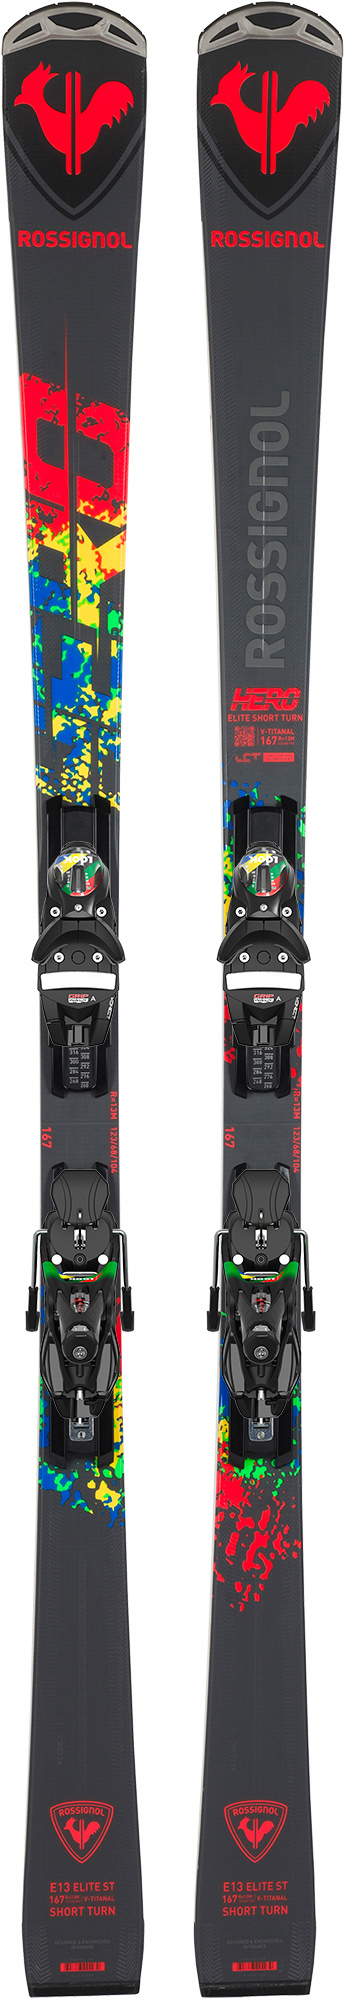 Rossignol Elite ST TI Edition) Goingsport (Limited – Winter